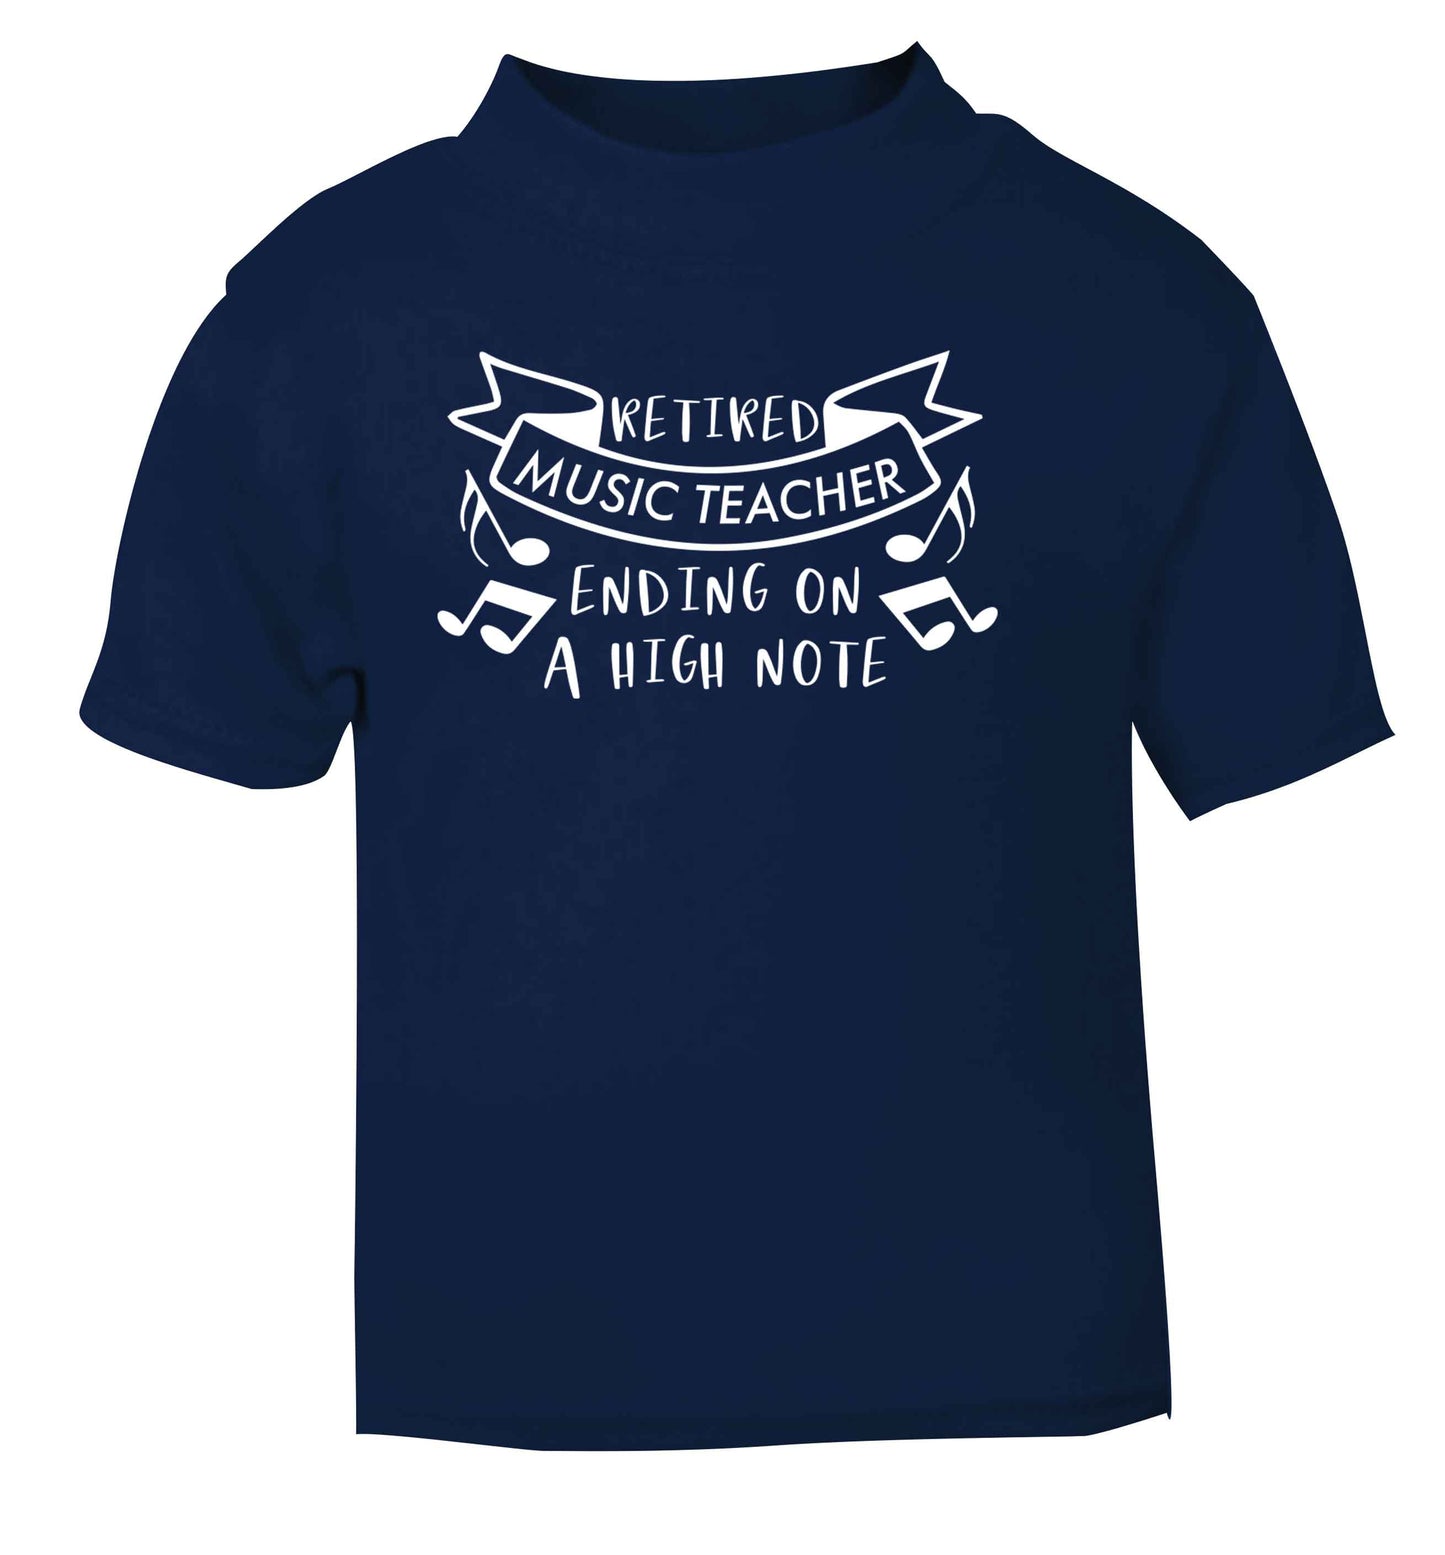 Retired music teacher ending on a high note navy Baby Toddler Tshirt 2 Years